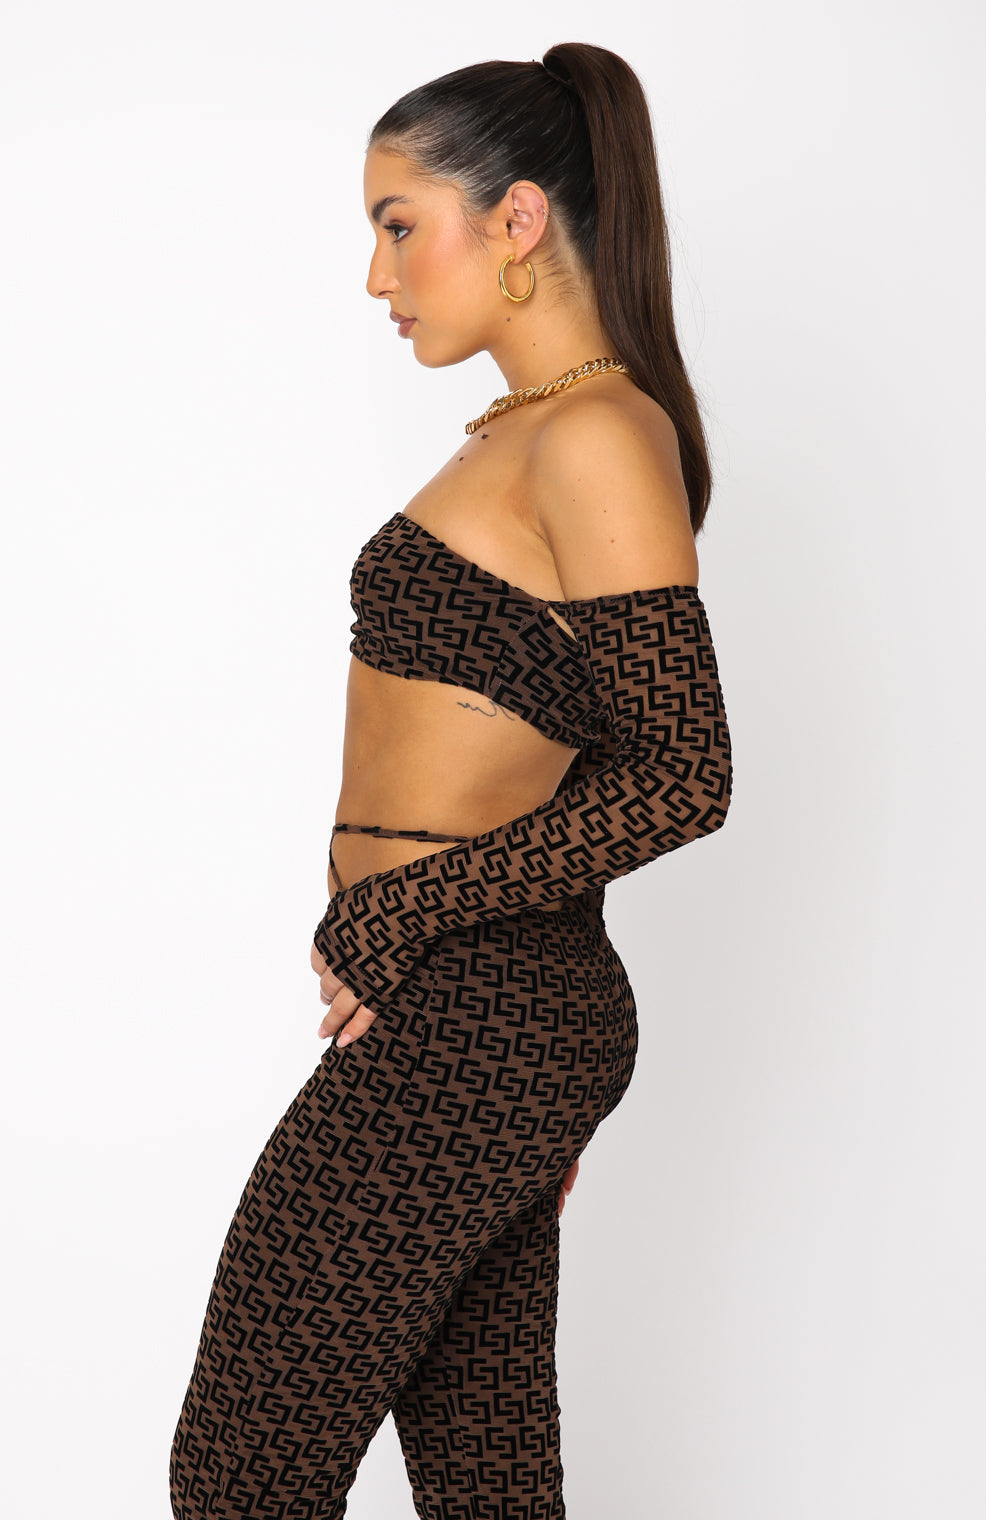 VAI21 wrap over crop top set in taupe with matching leggings